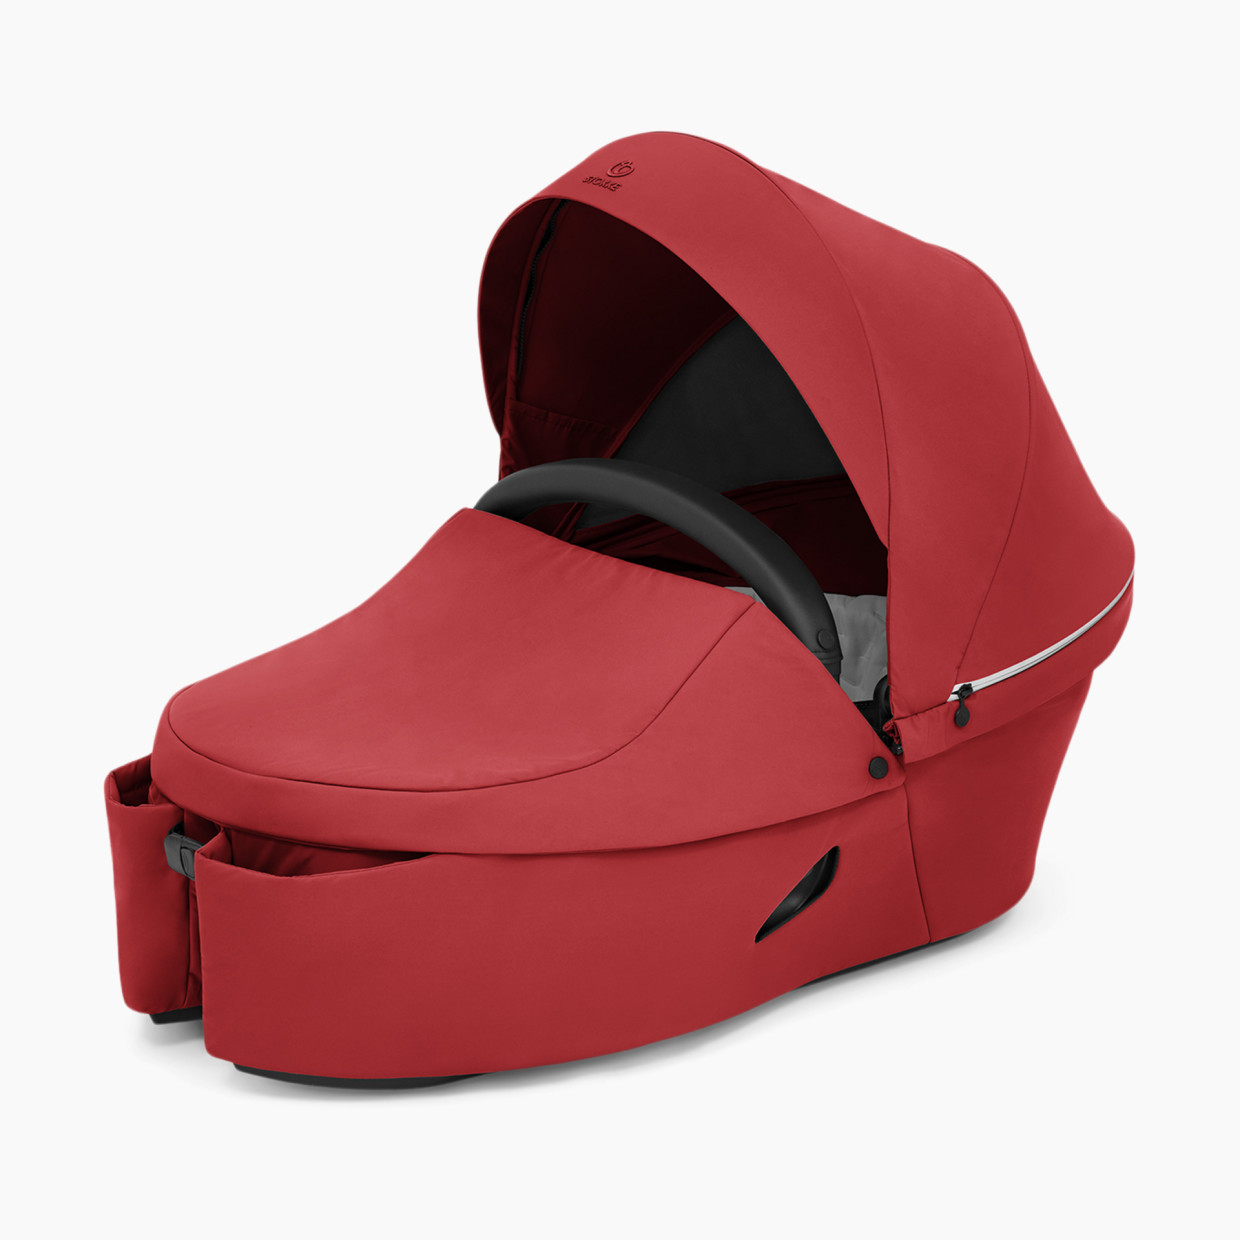 Stokke Xplory X Carry Cot - Ruby Red.